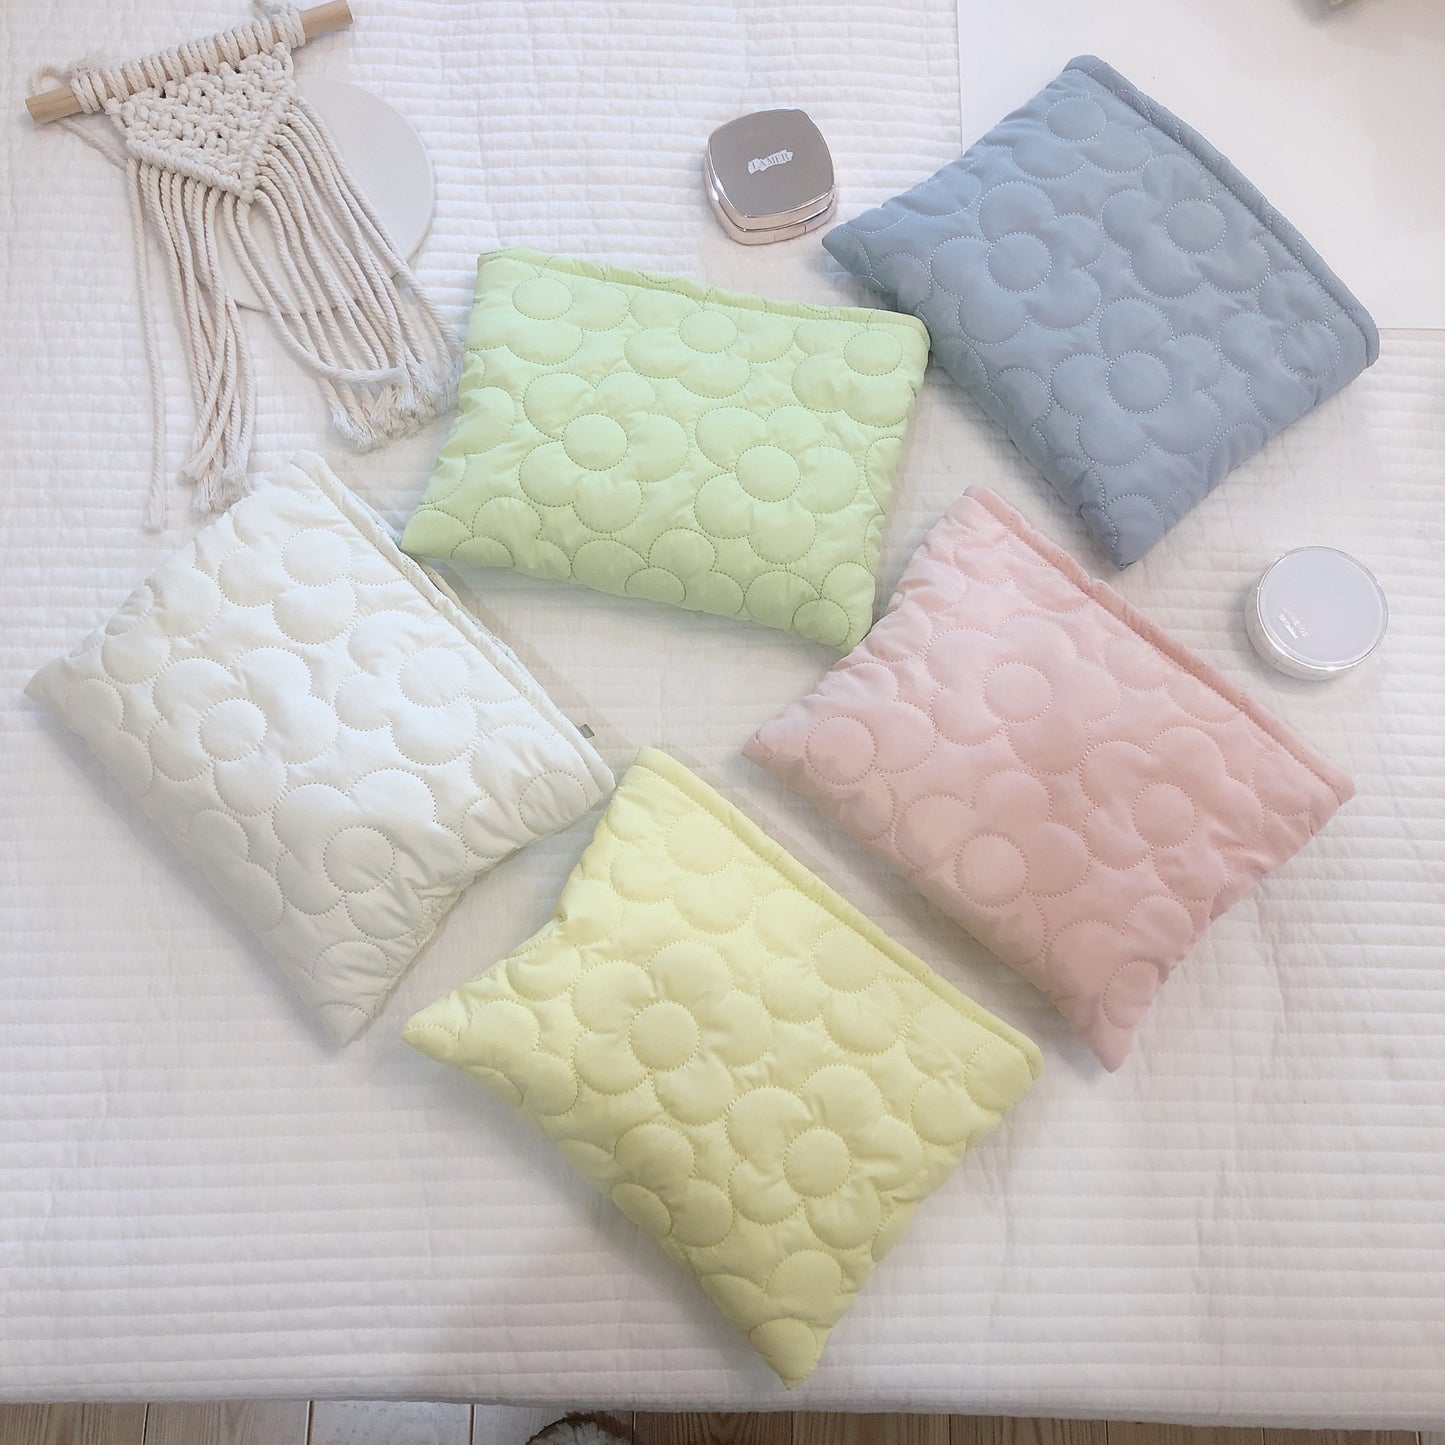 Quilted Makeup Bag